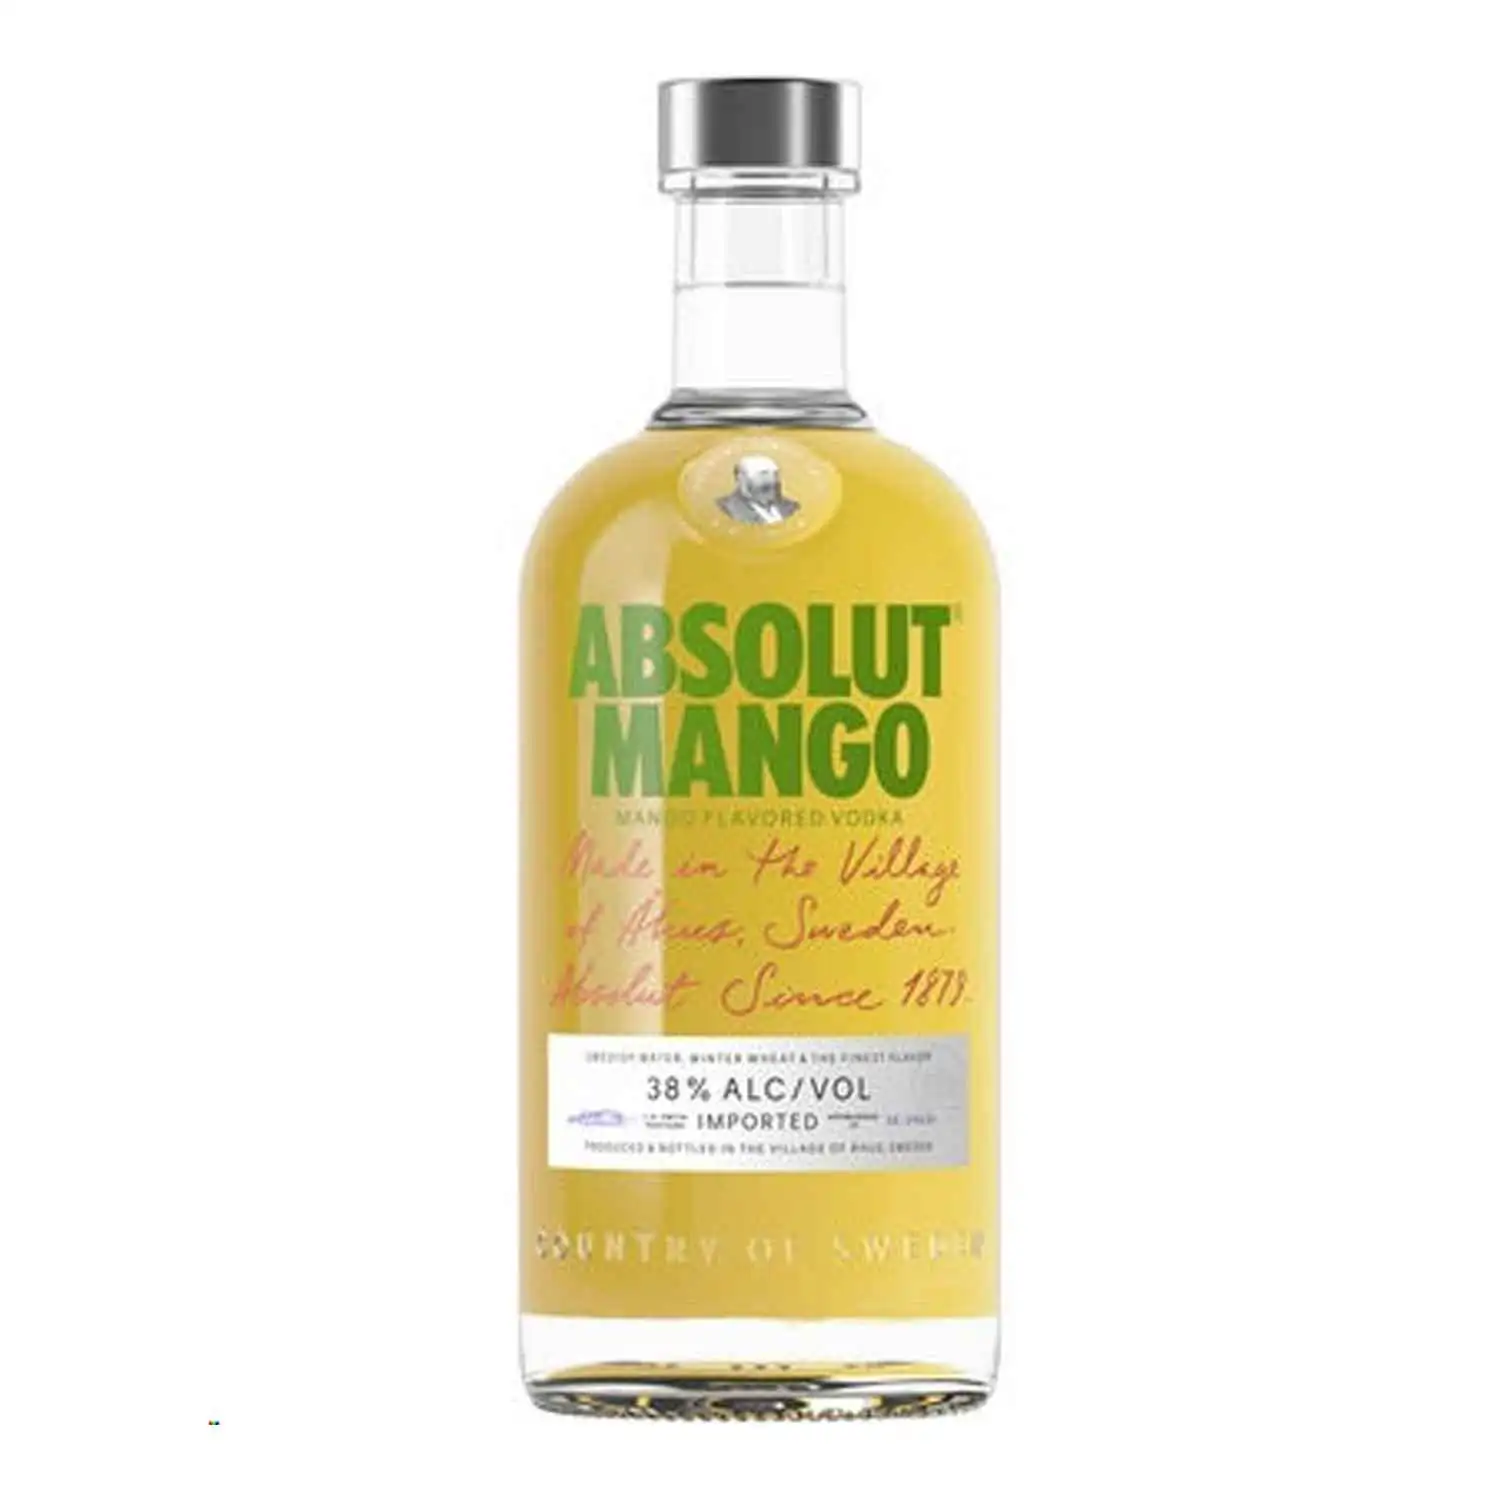 Absolut mango 70cl Alc 40% - Buy at Real Tobacco